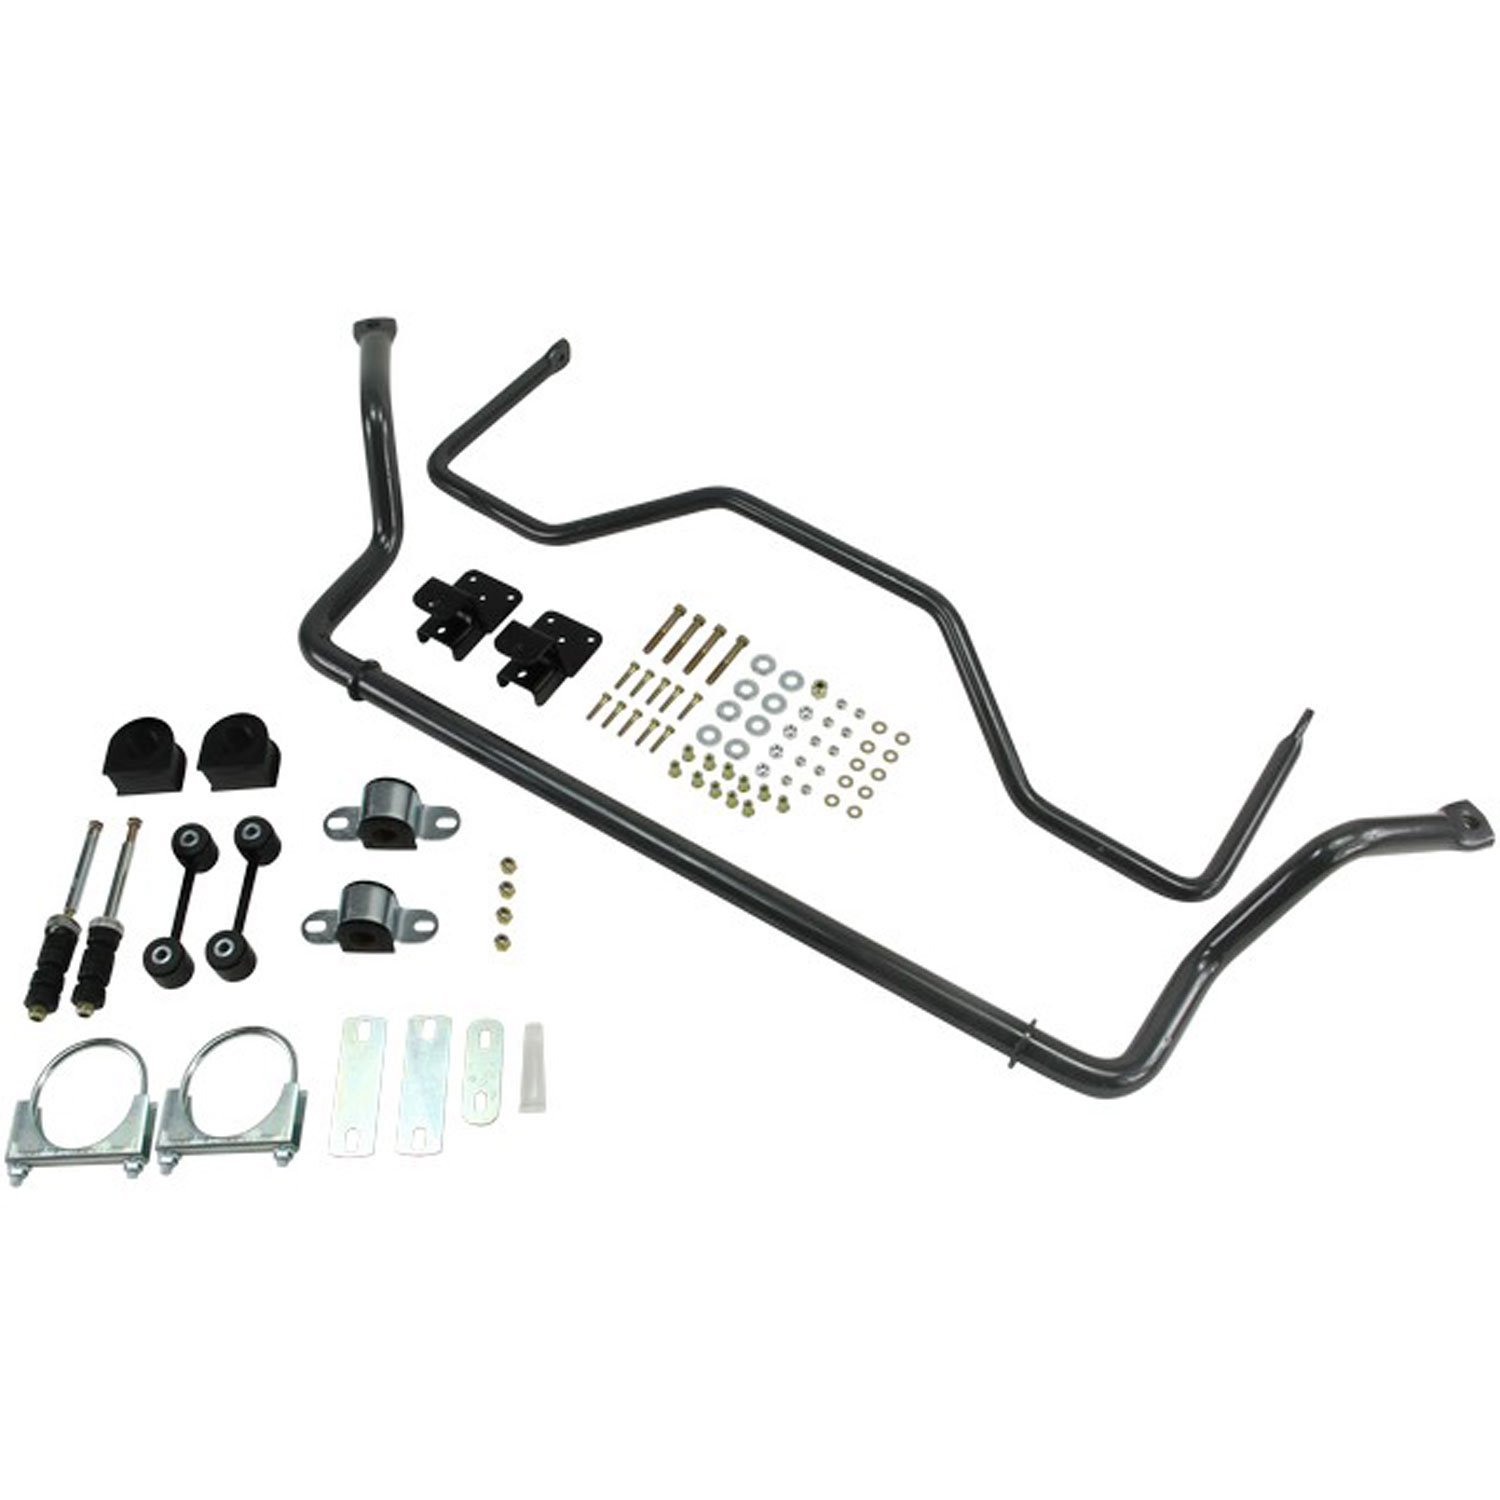 Front/Rear Sway Bar Kit for 1997-2003 Ford F150 Crew Cab